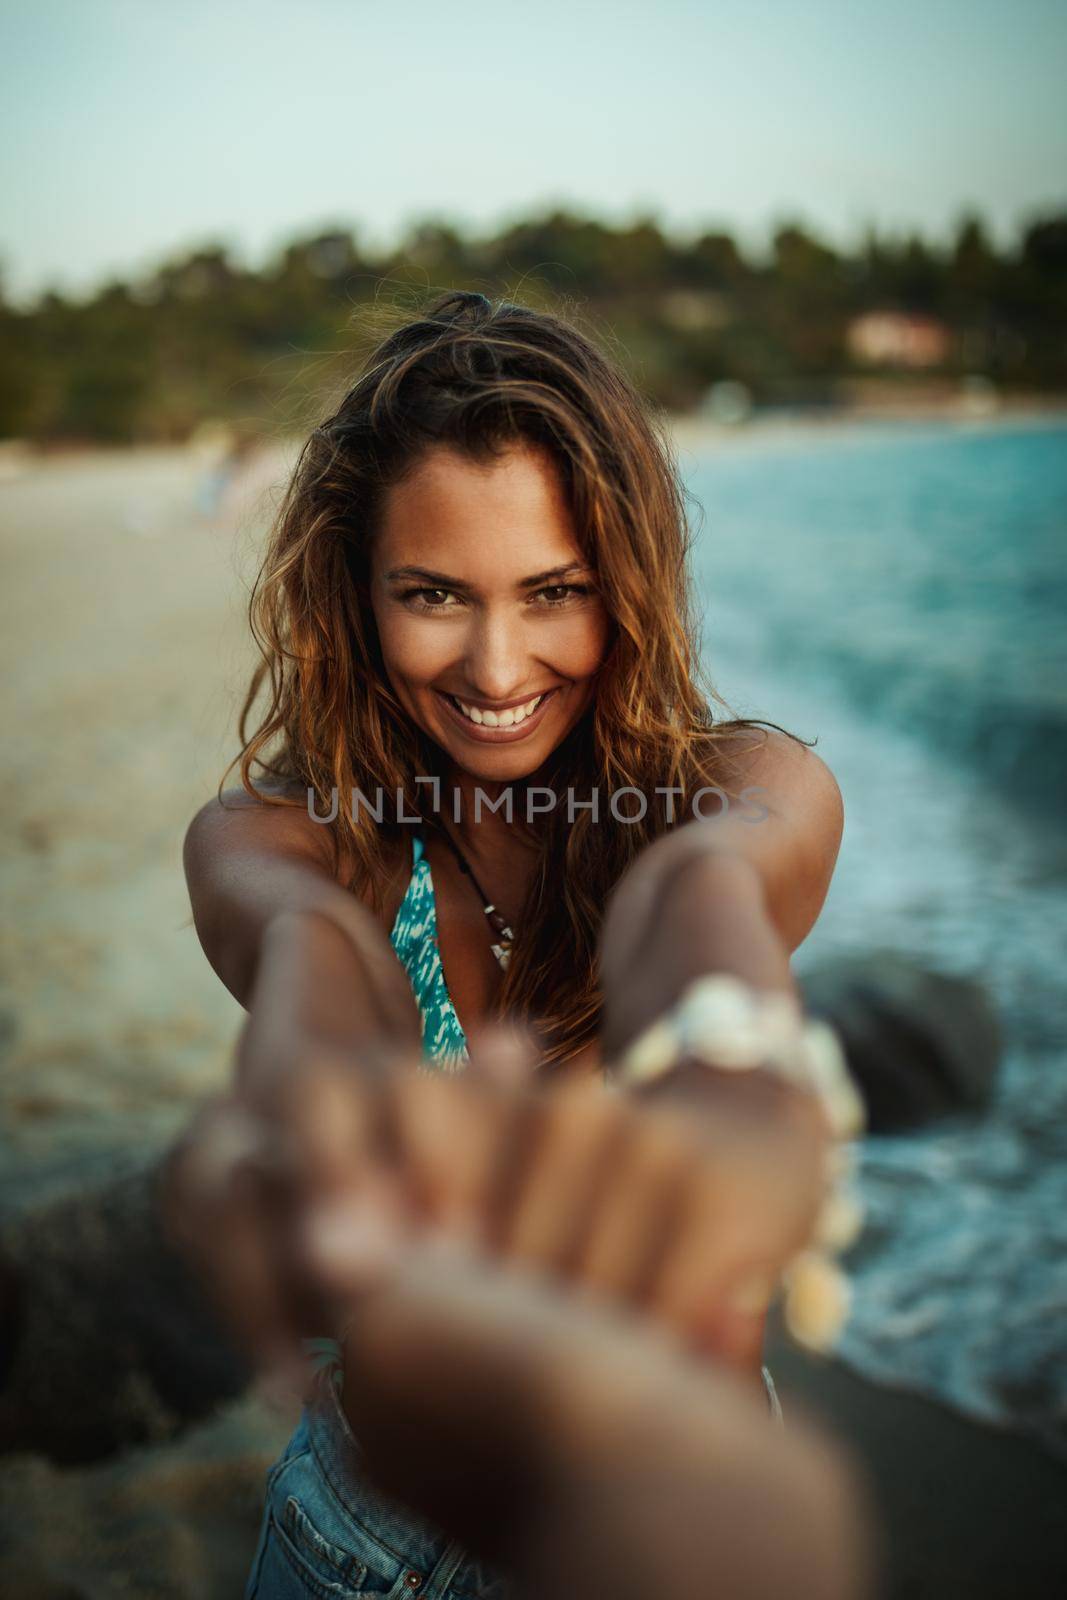 Shot of an attractive young woman leading someone by the hand at the beach.